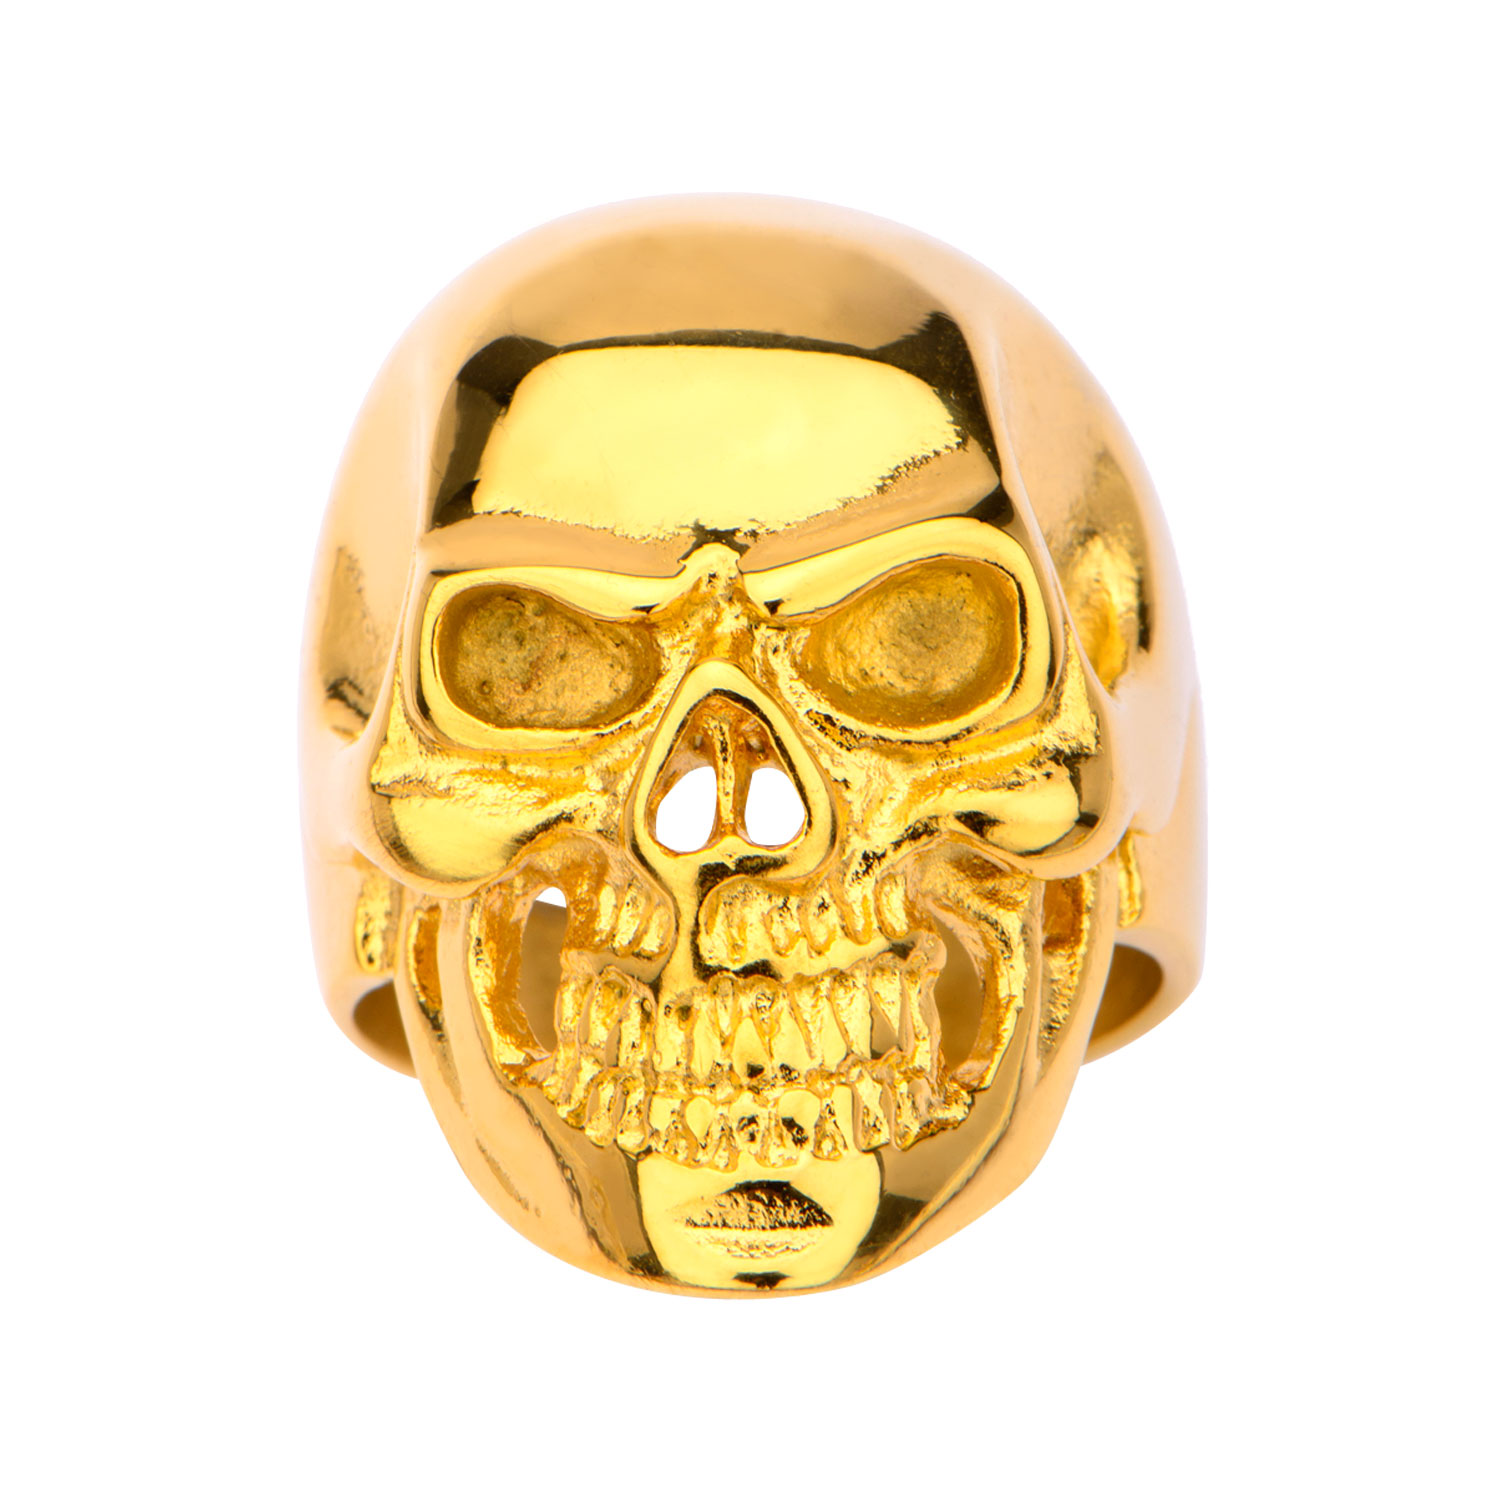 Gold Plated High Polished Front Face Skull Ring Image 2 P.K. Bennett Jewelers Mundelein, IL